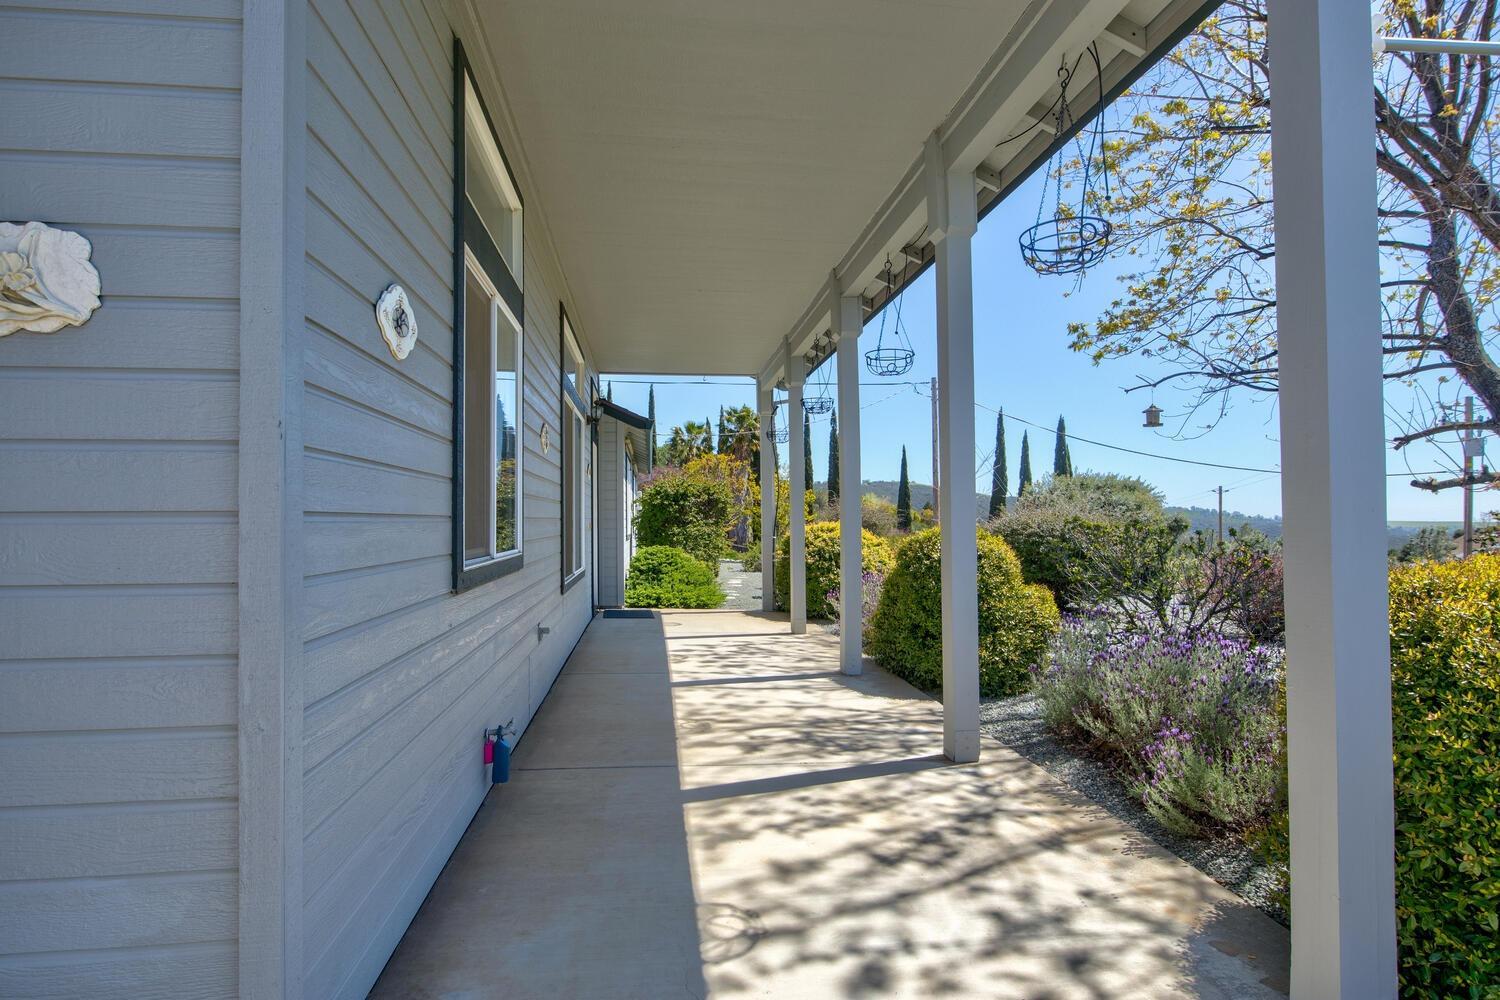 Photo of 6653 Harding Rd in Valley Springs, CA